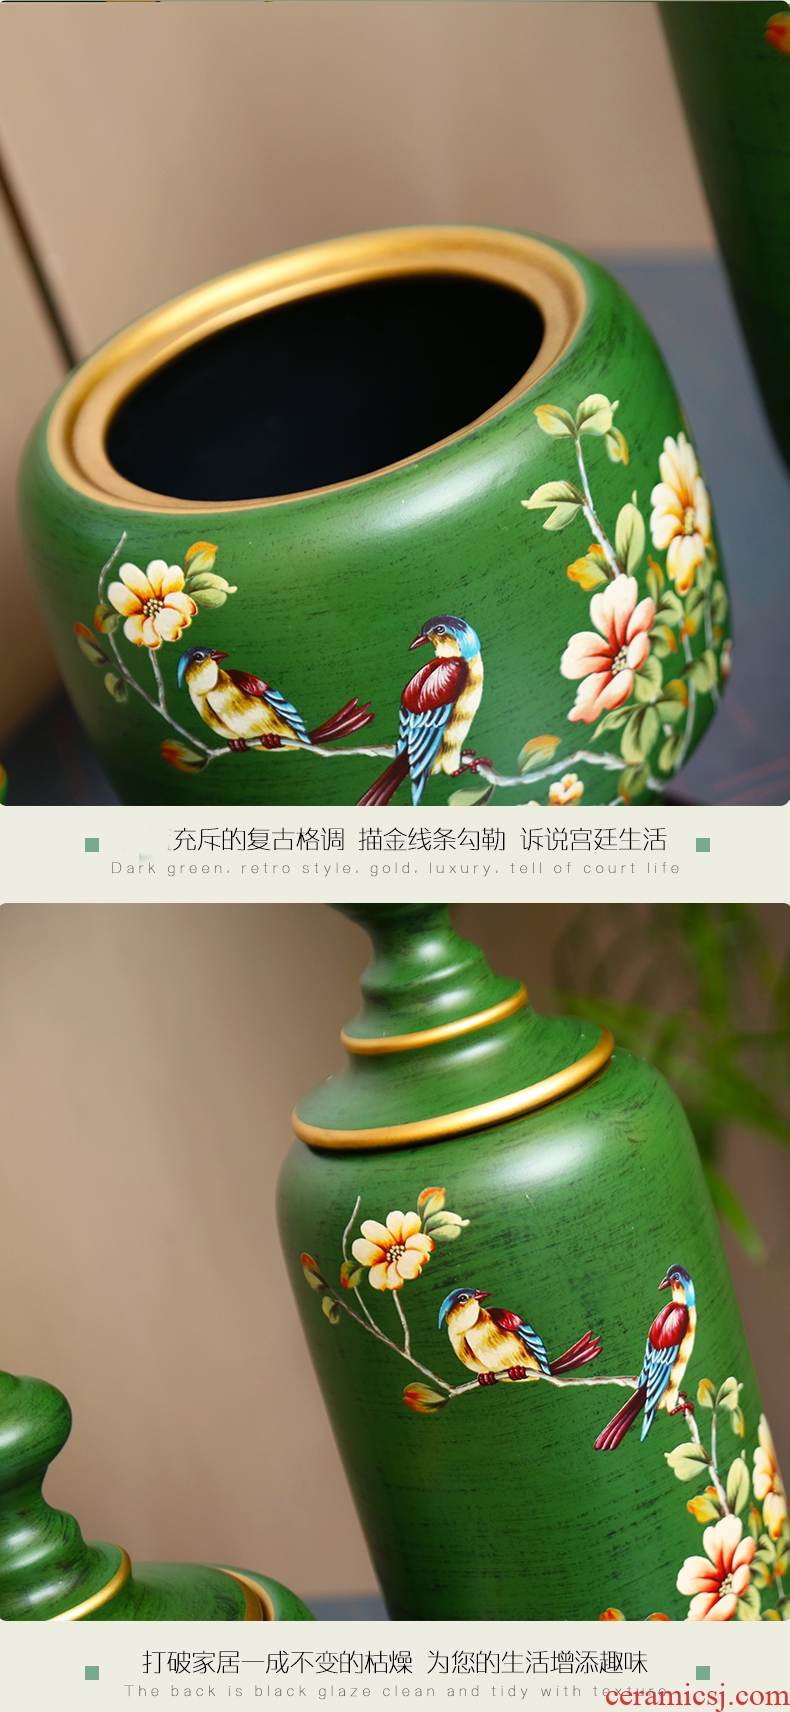 European American country ceramic storage tank of TV ark household soft adornment the sitting room porch European wine furnishing articles